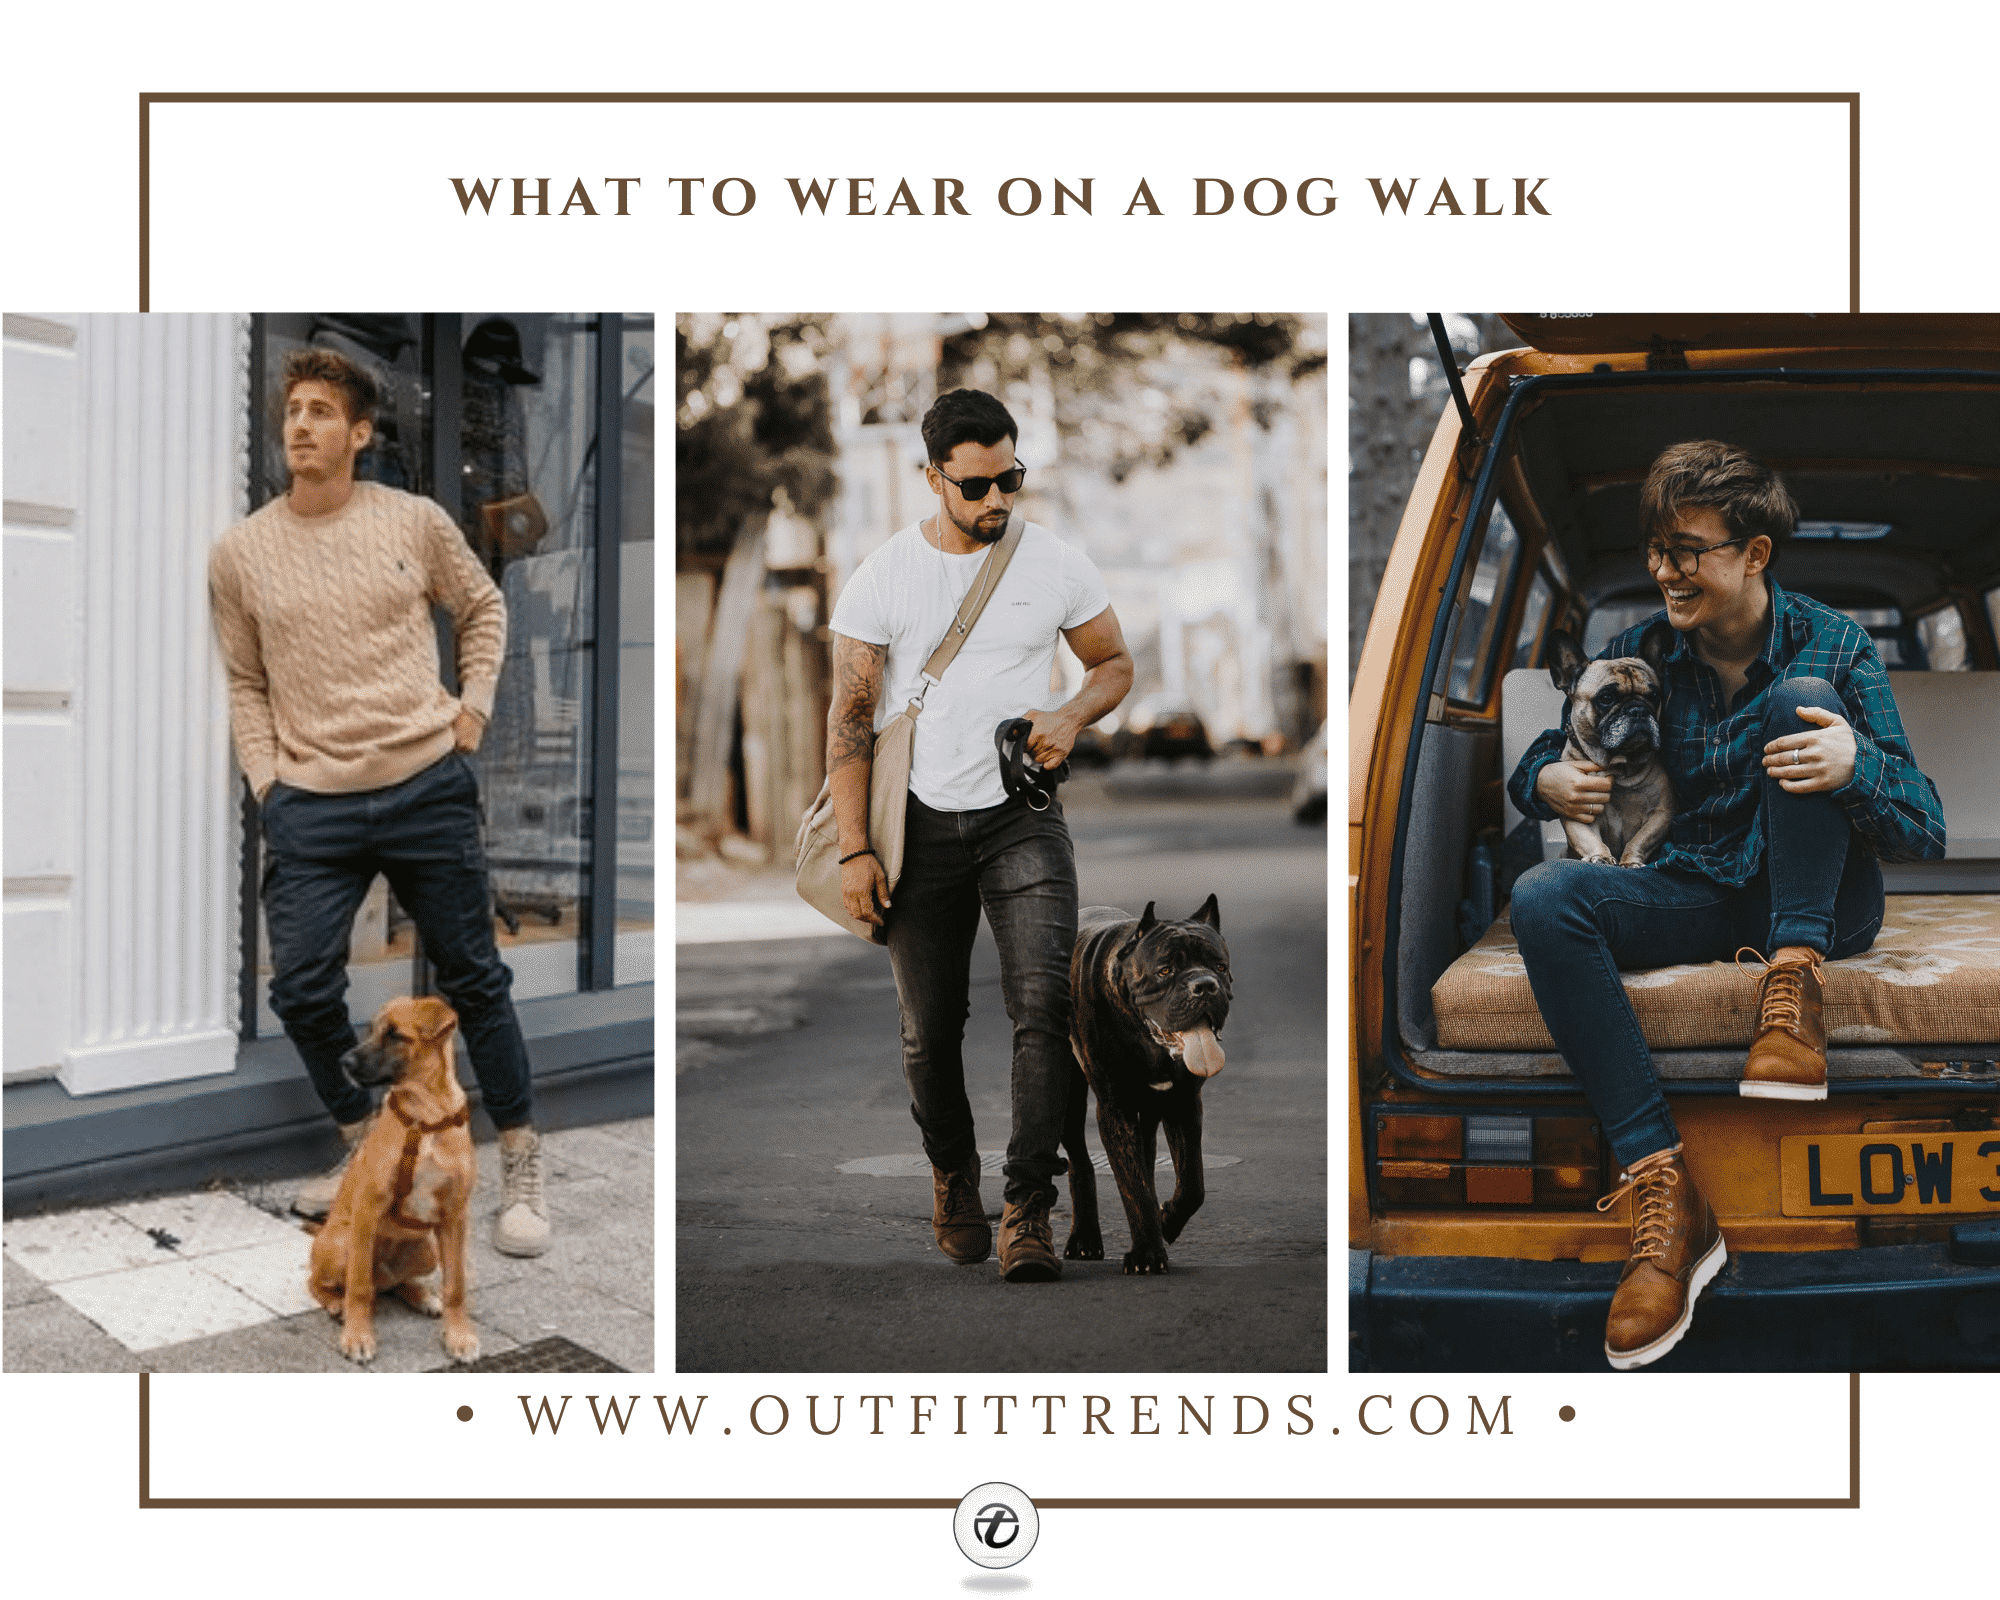 https://www.outfittrends.com/wp-content/uploads/2021/06/Dog-Walk-Outfits-Featured-Image.png